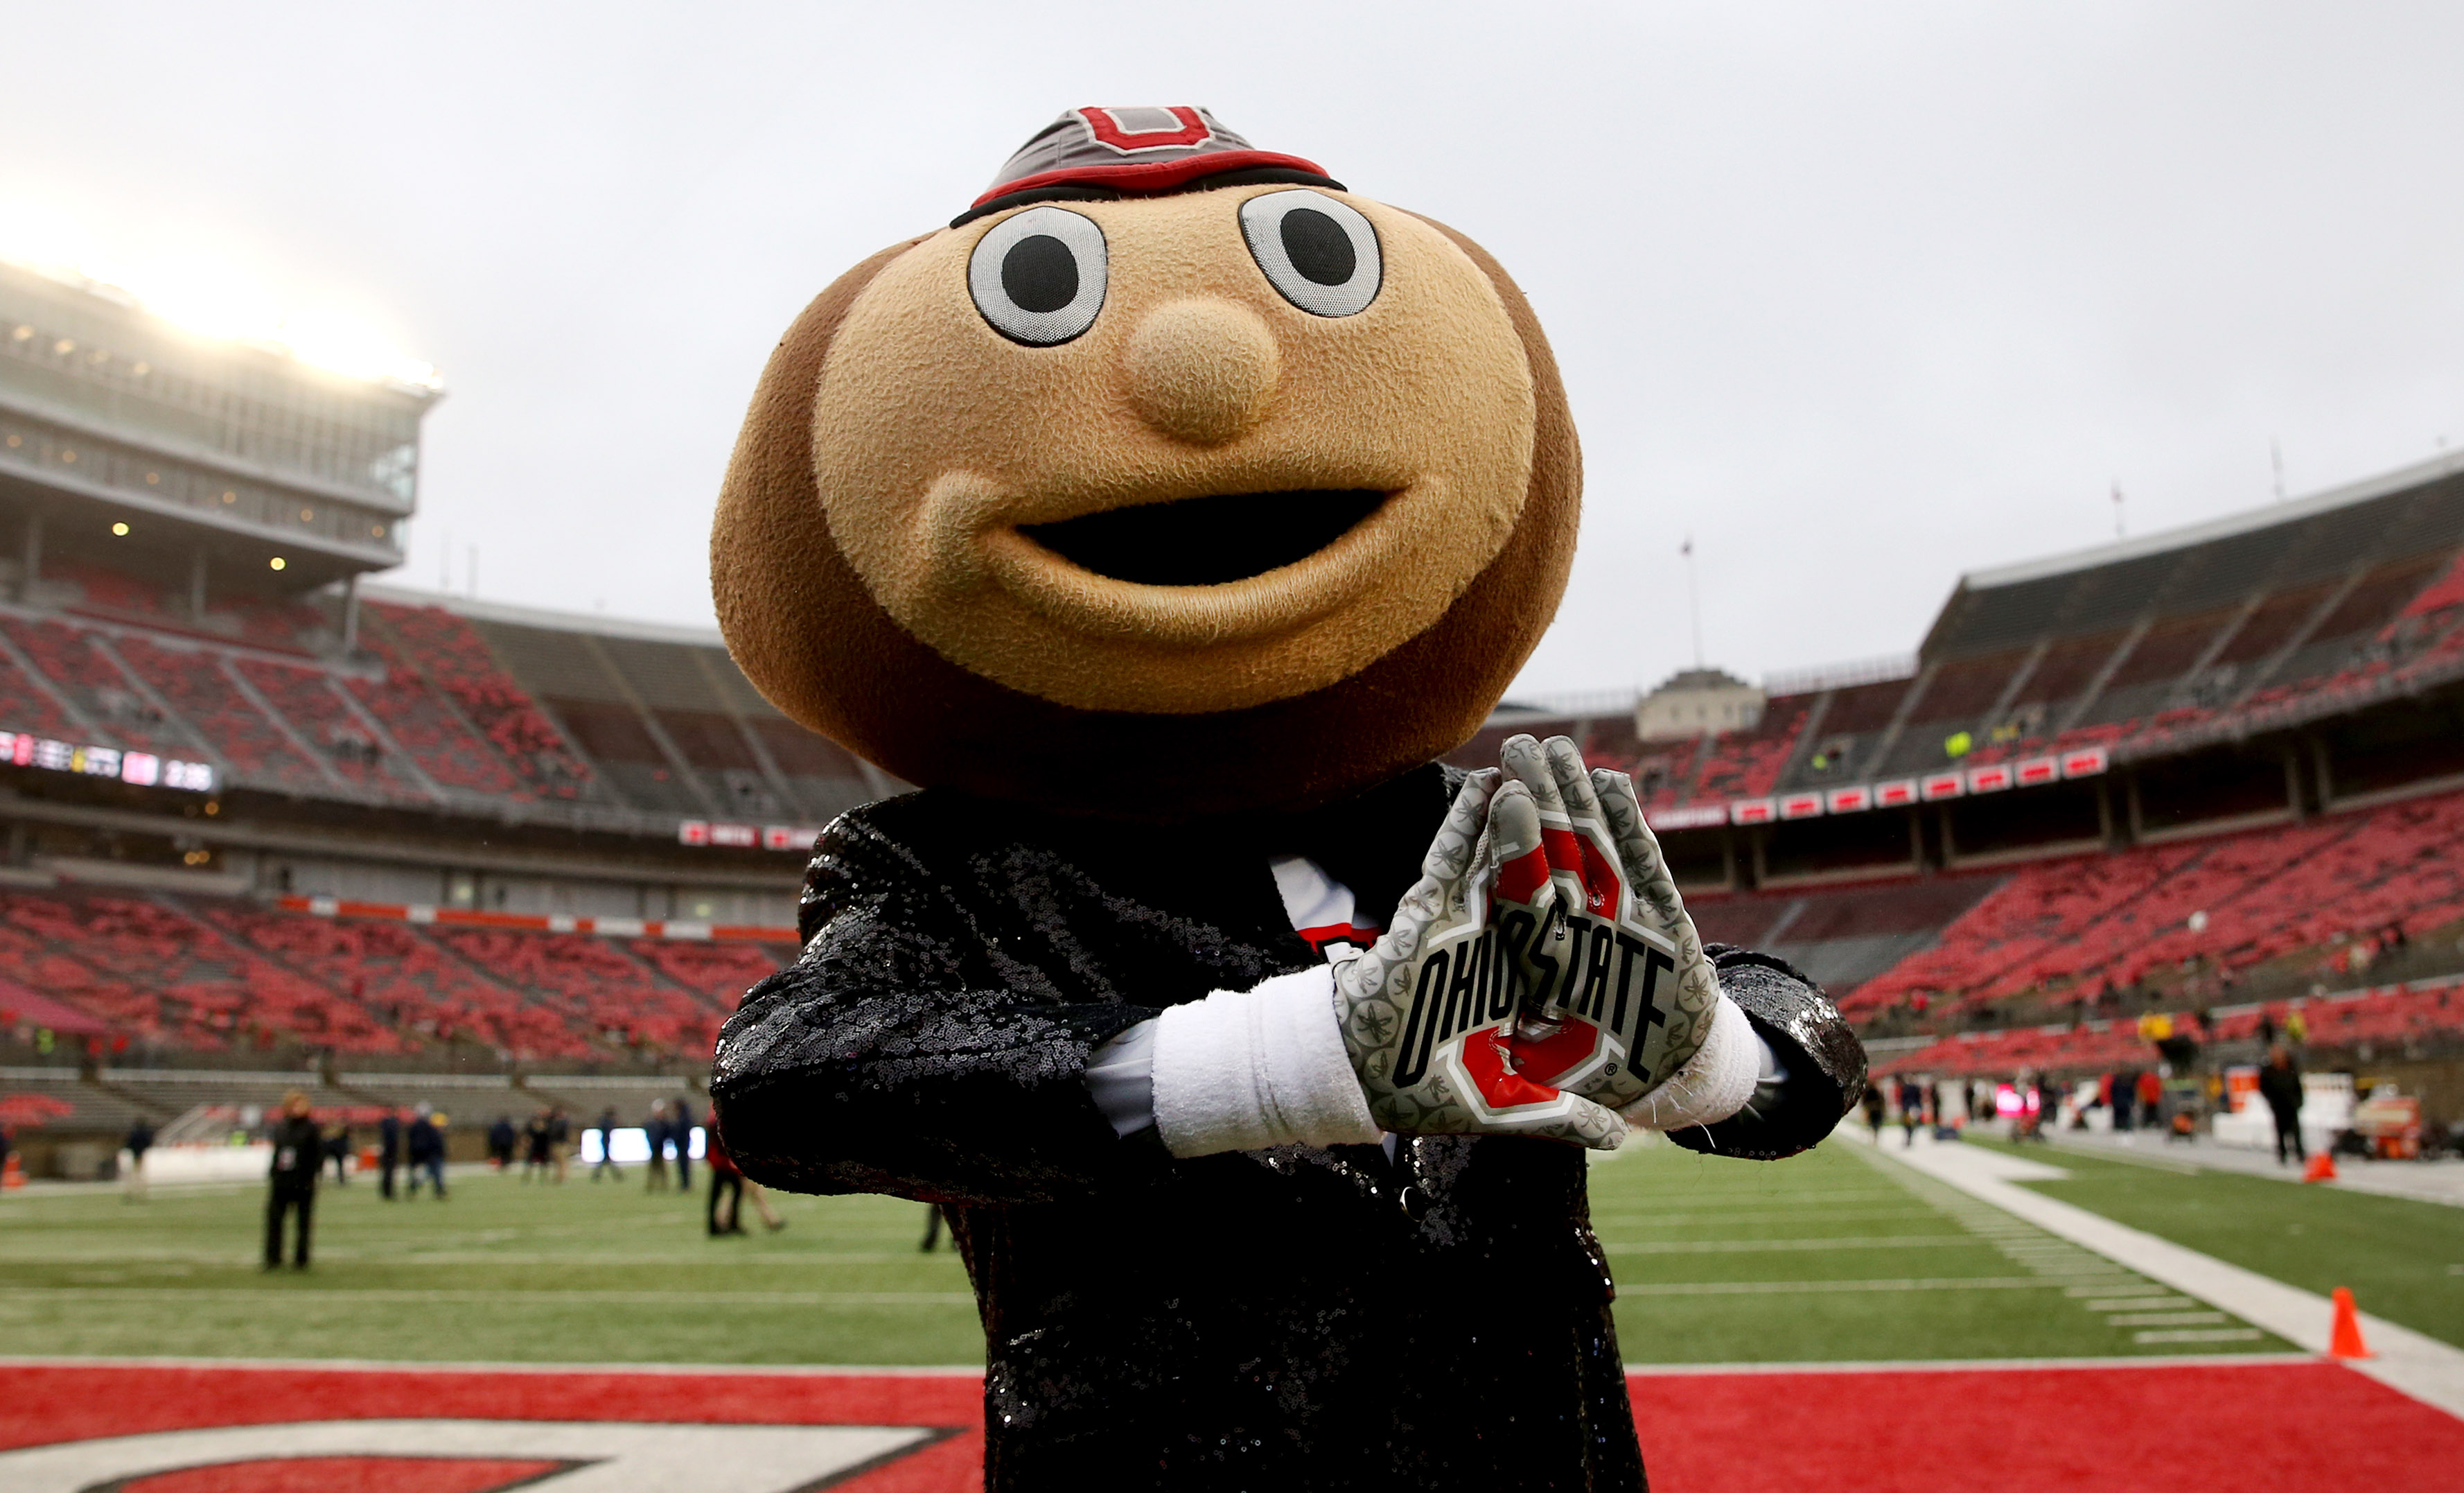 Ohio State vs. Wisconsin: How to Watch on Peacock